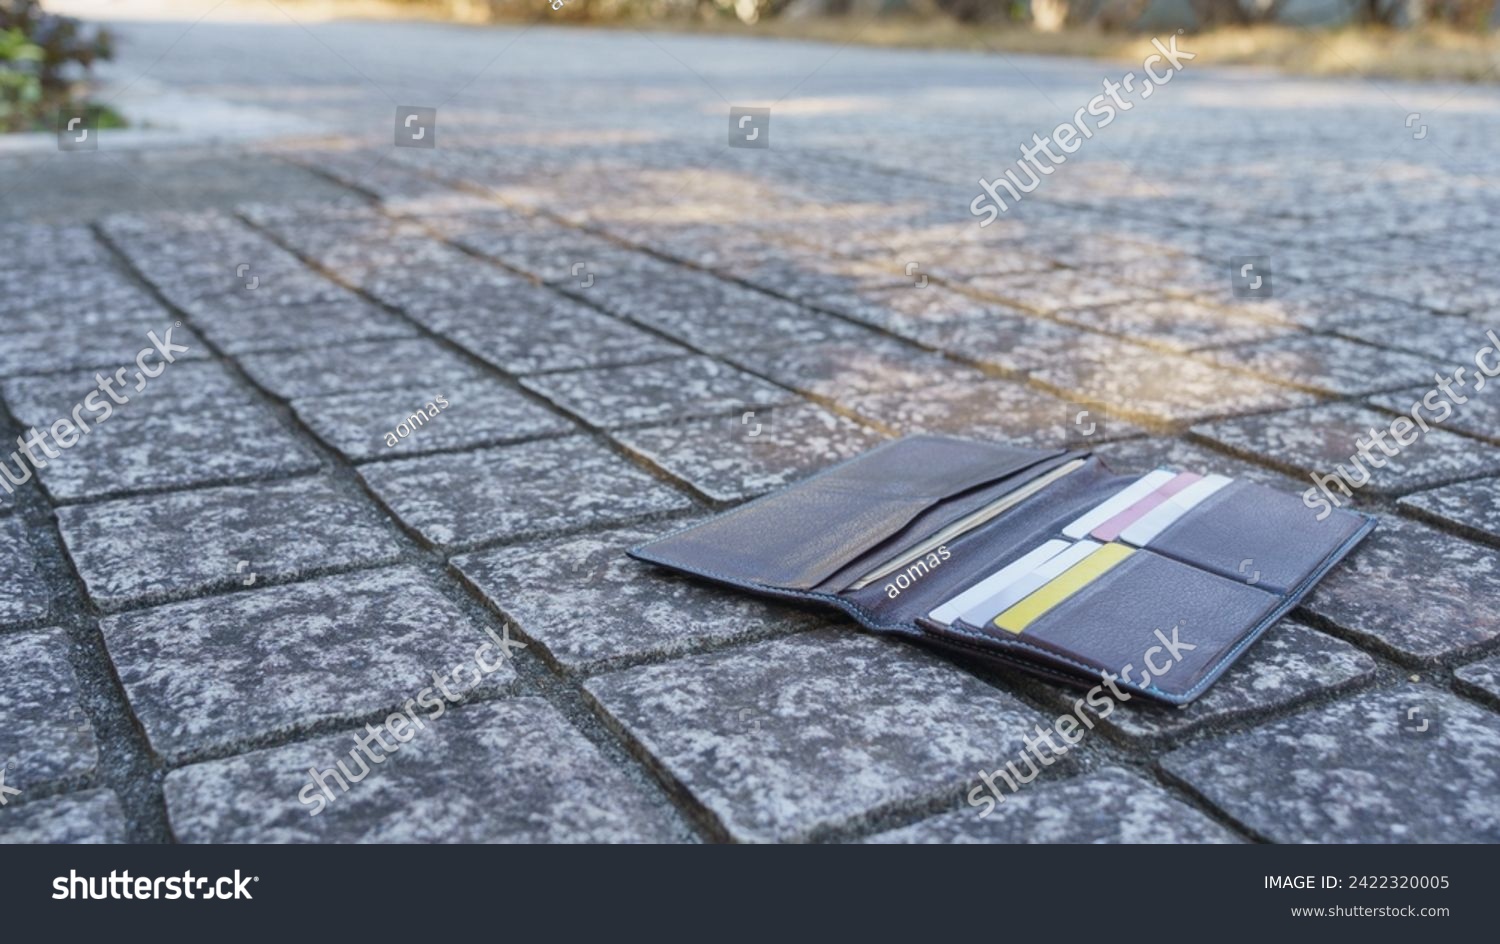 Image of dropping your wallet outdoors. #2422320005